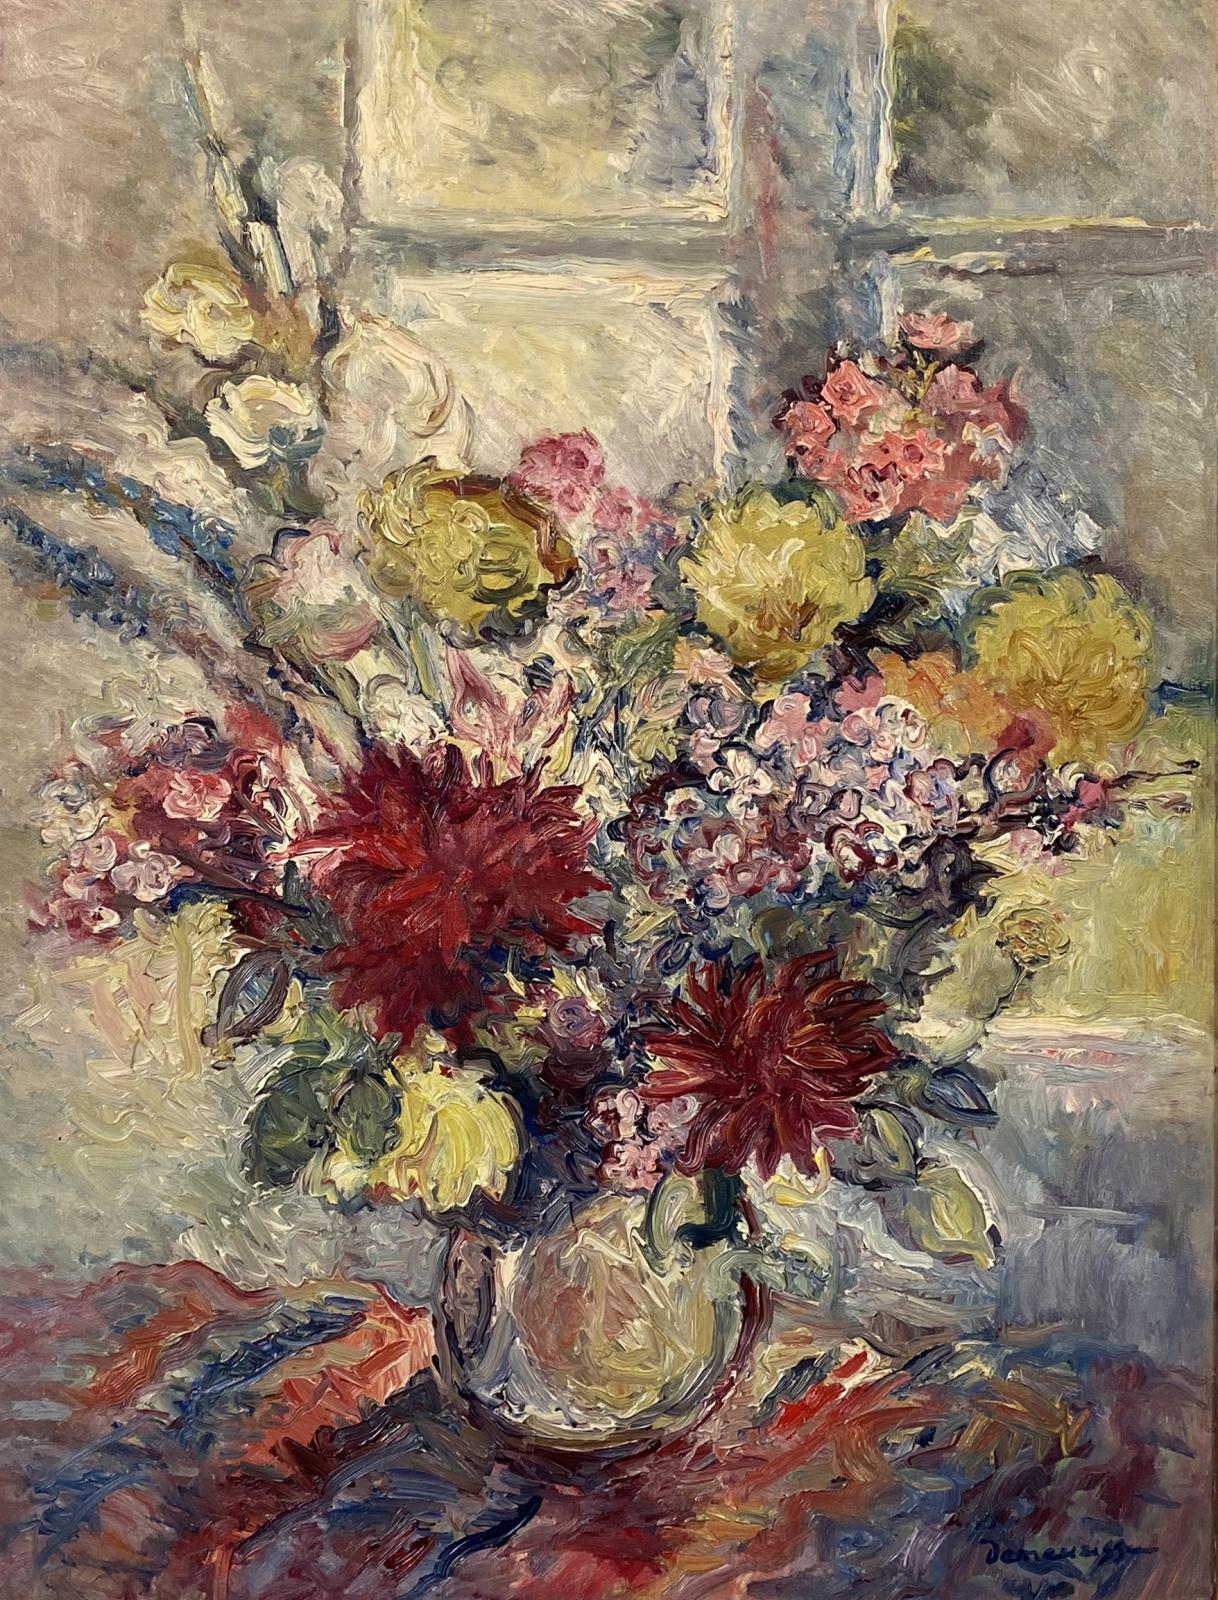 A colorful painting made with lively and thick strokes depicting a vase of flowers